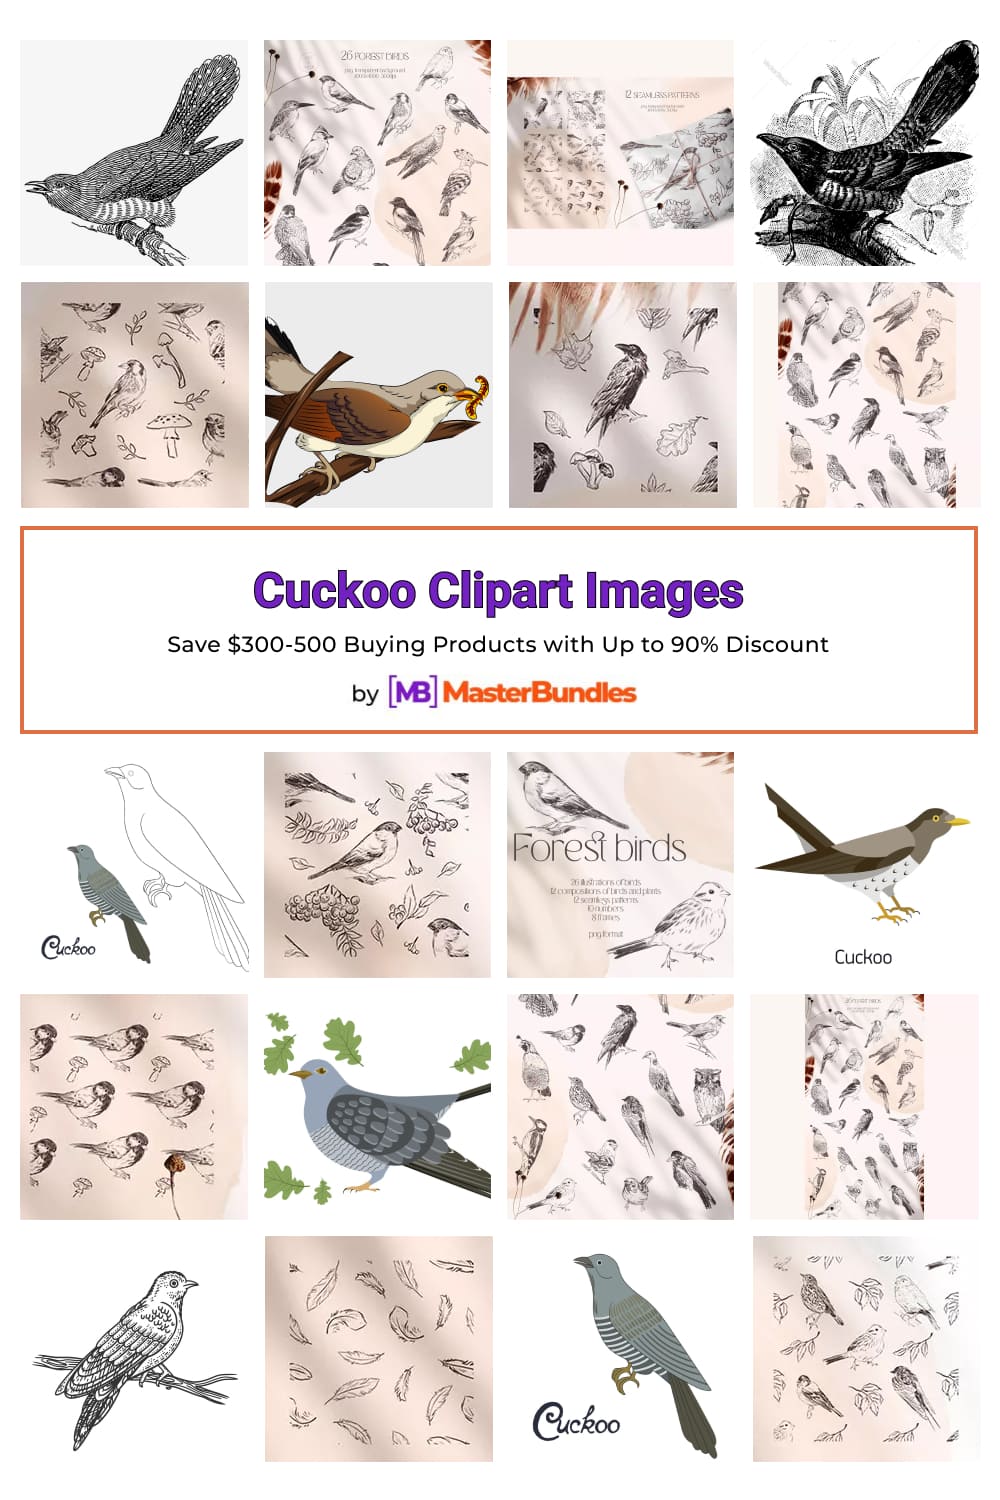 Cuckoo Clipart Images Pinterest.